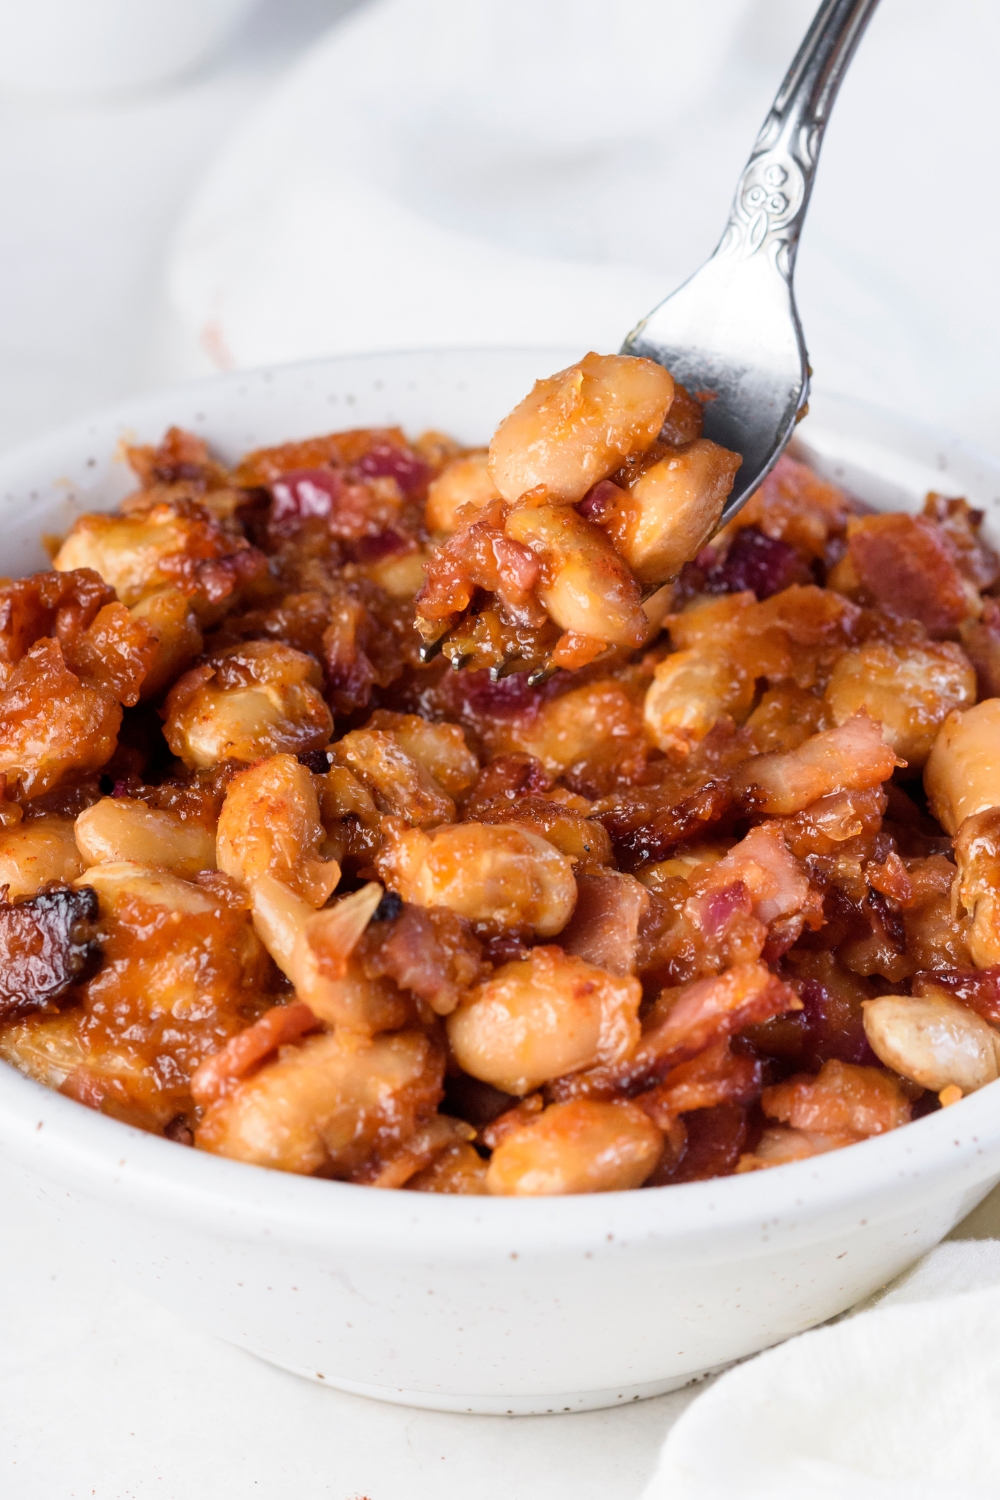 A fork holding a bite of baked beans with crispy bacon coated in sauce. The fork is above a bowl filled with baked beans.